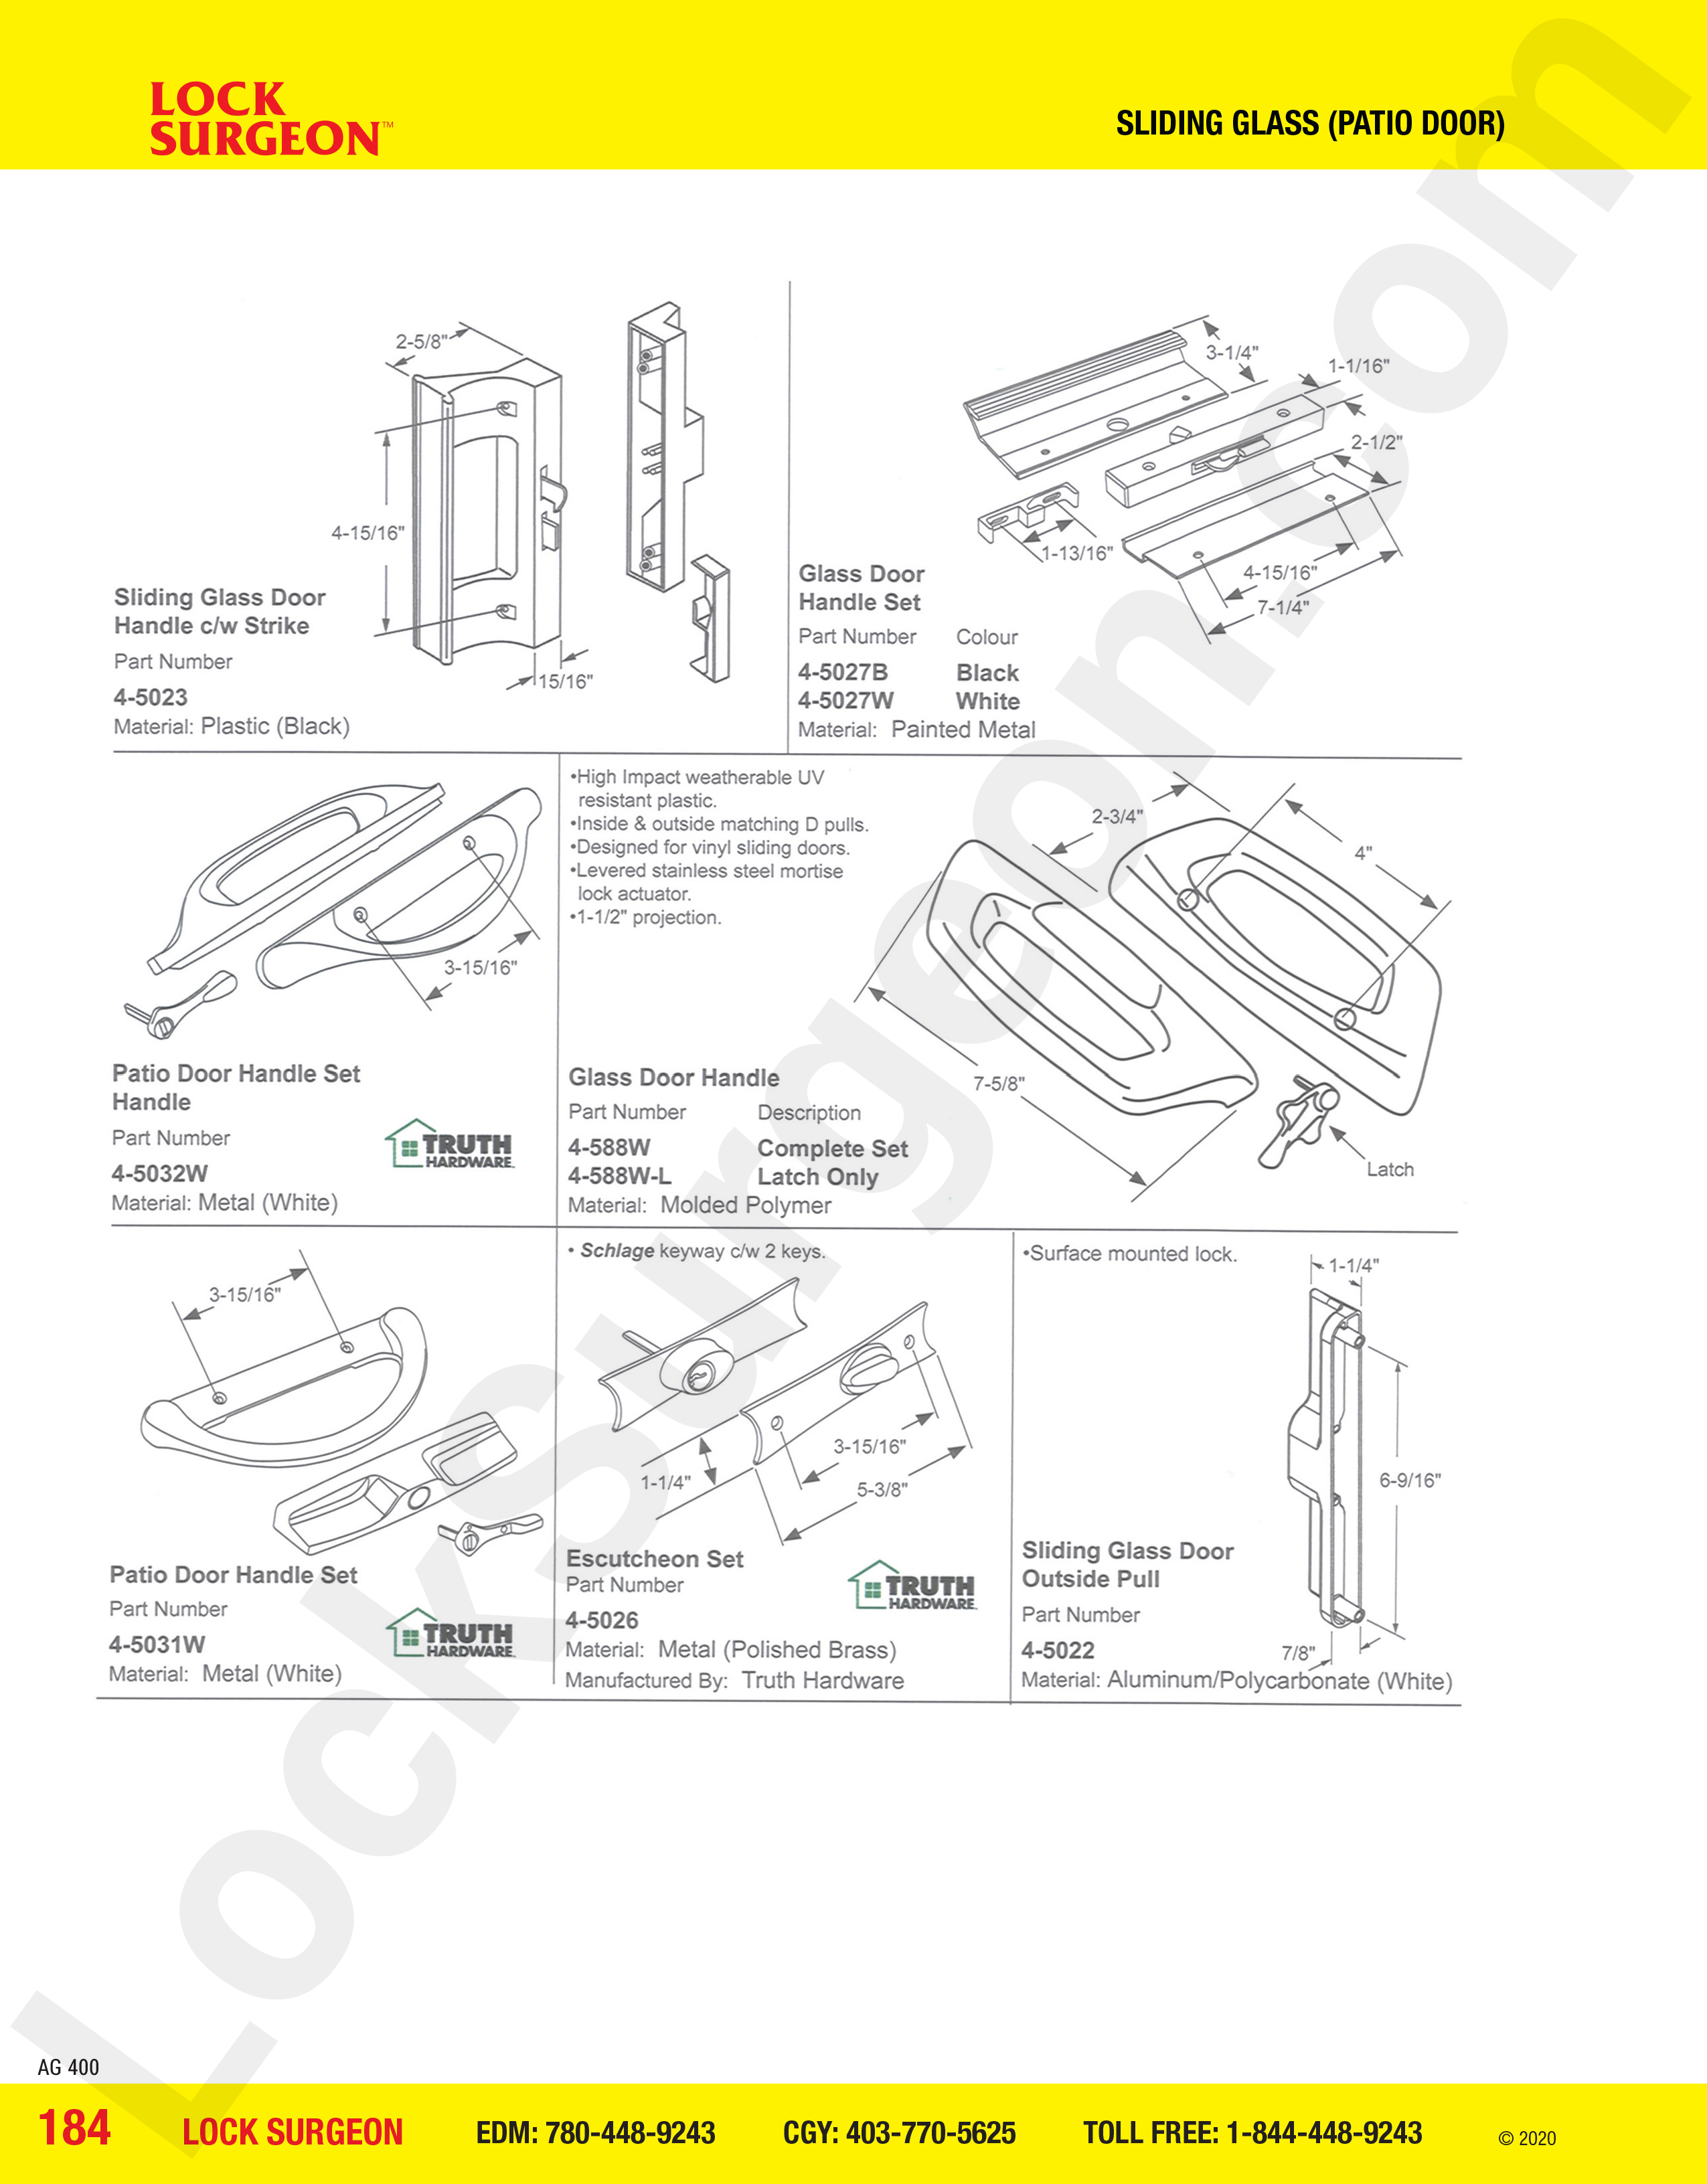 Sliding Glass and Patio Door handle sets